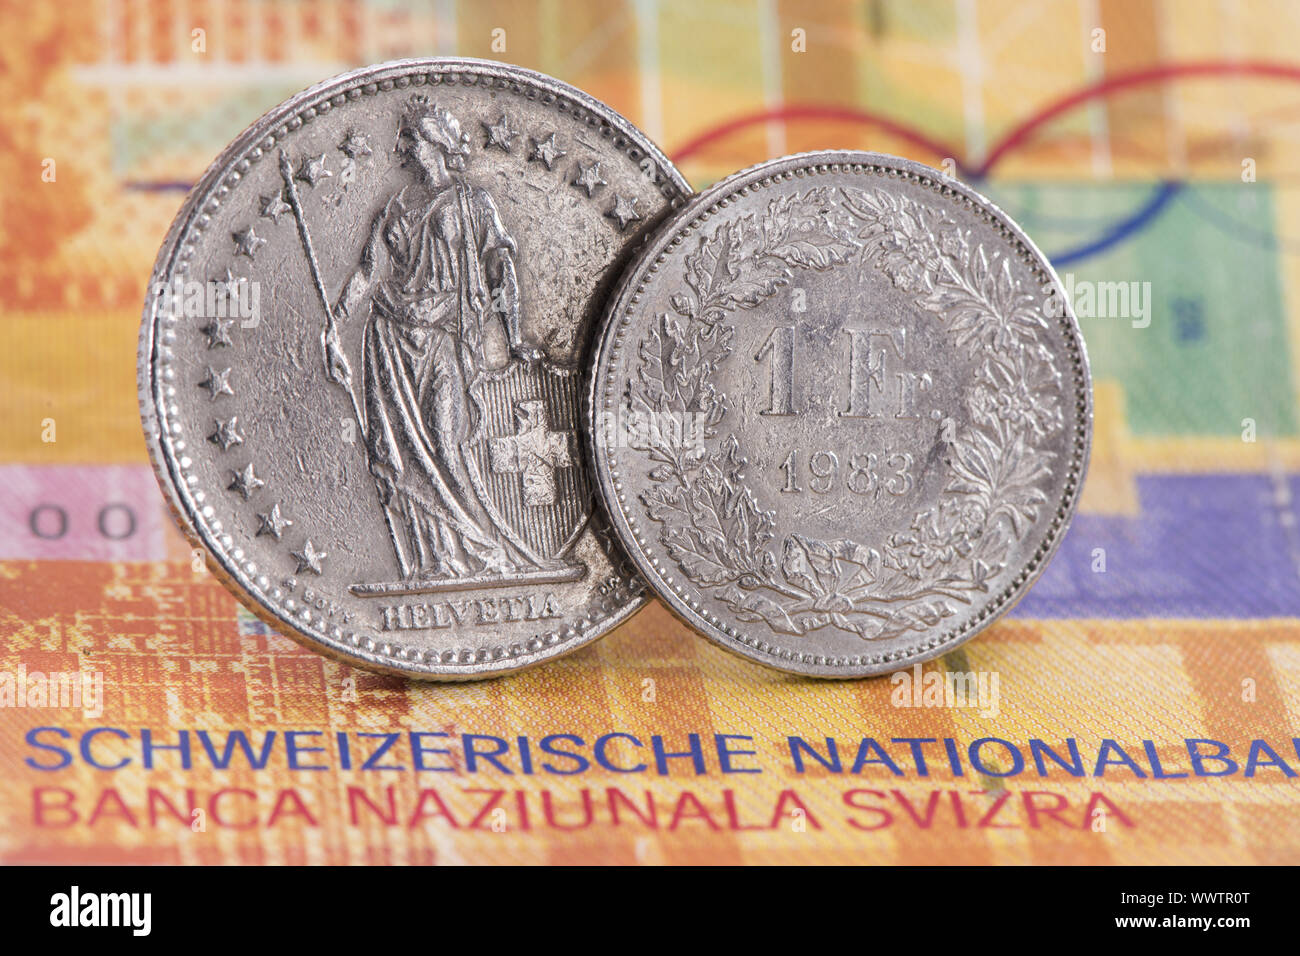 Swiss franc on the National Bank's banknote Stock Photo